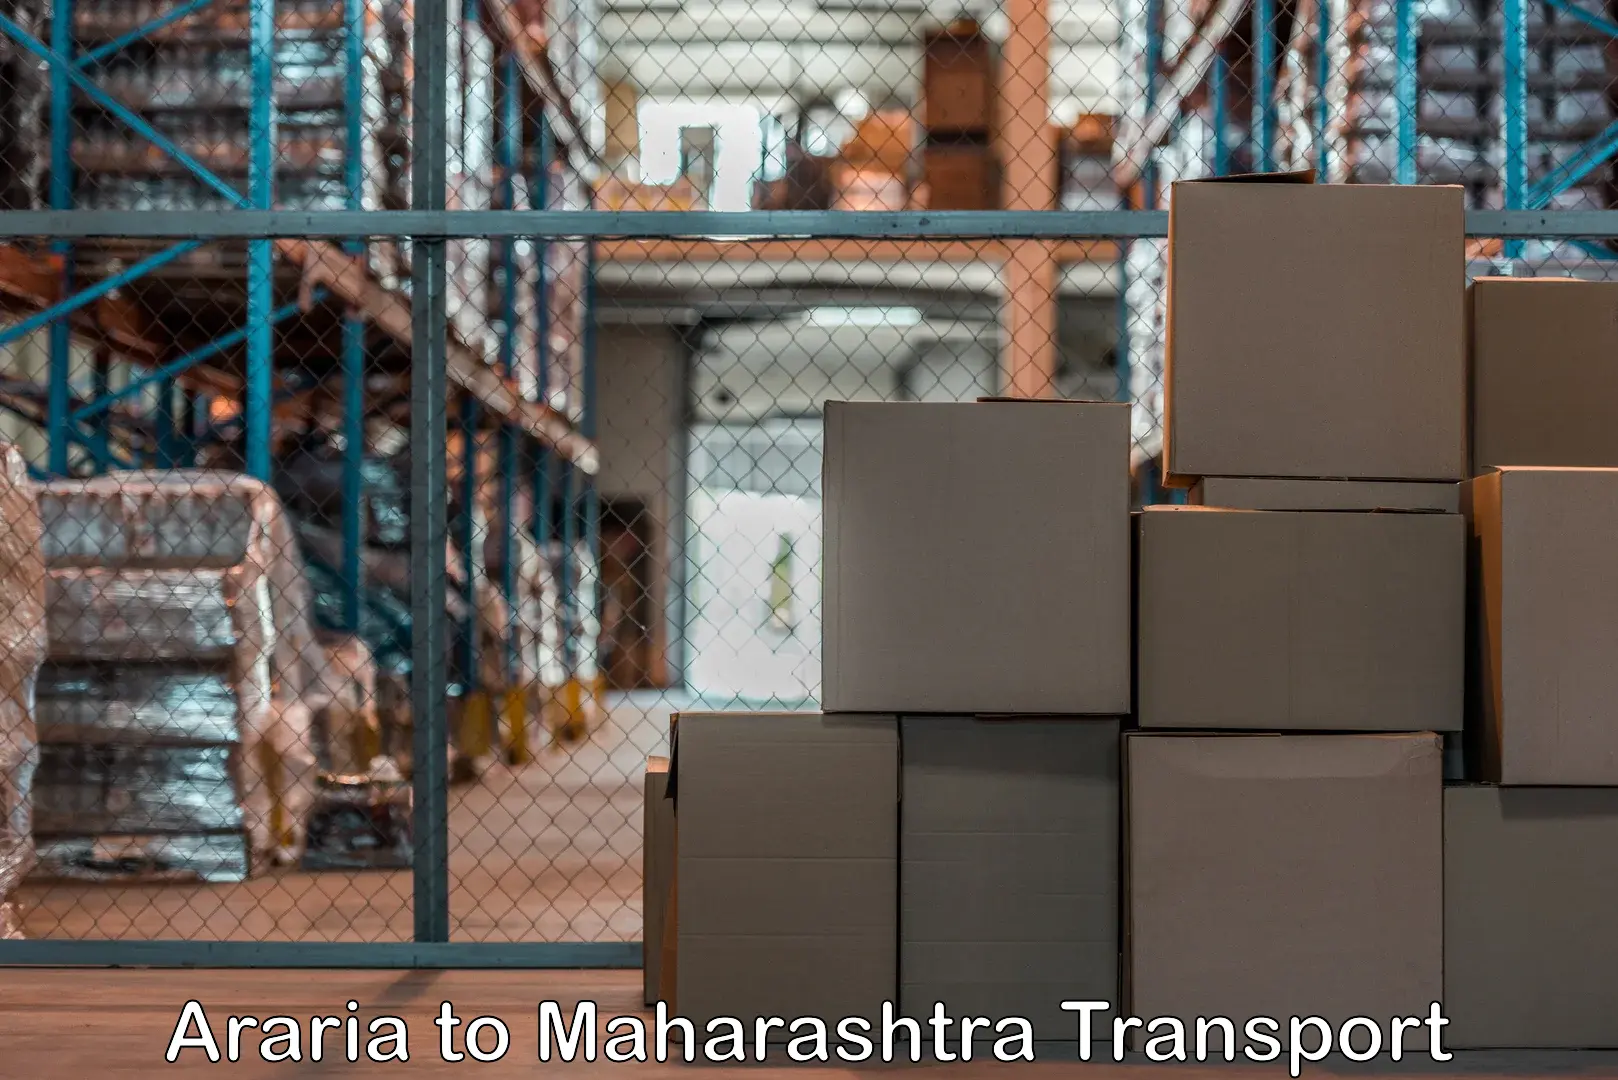 Express transport services in Araria to DY Patil Vidyapeeth Mumbai